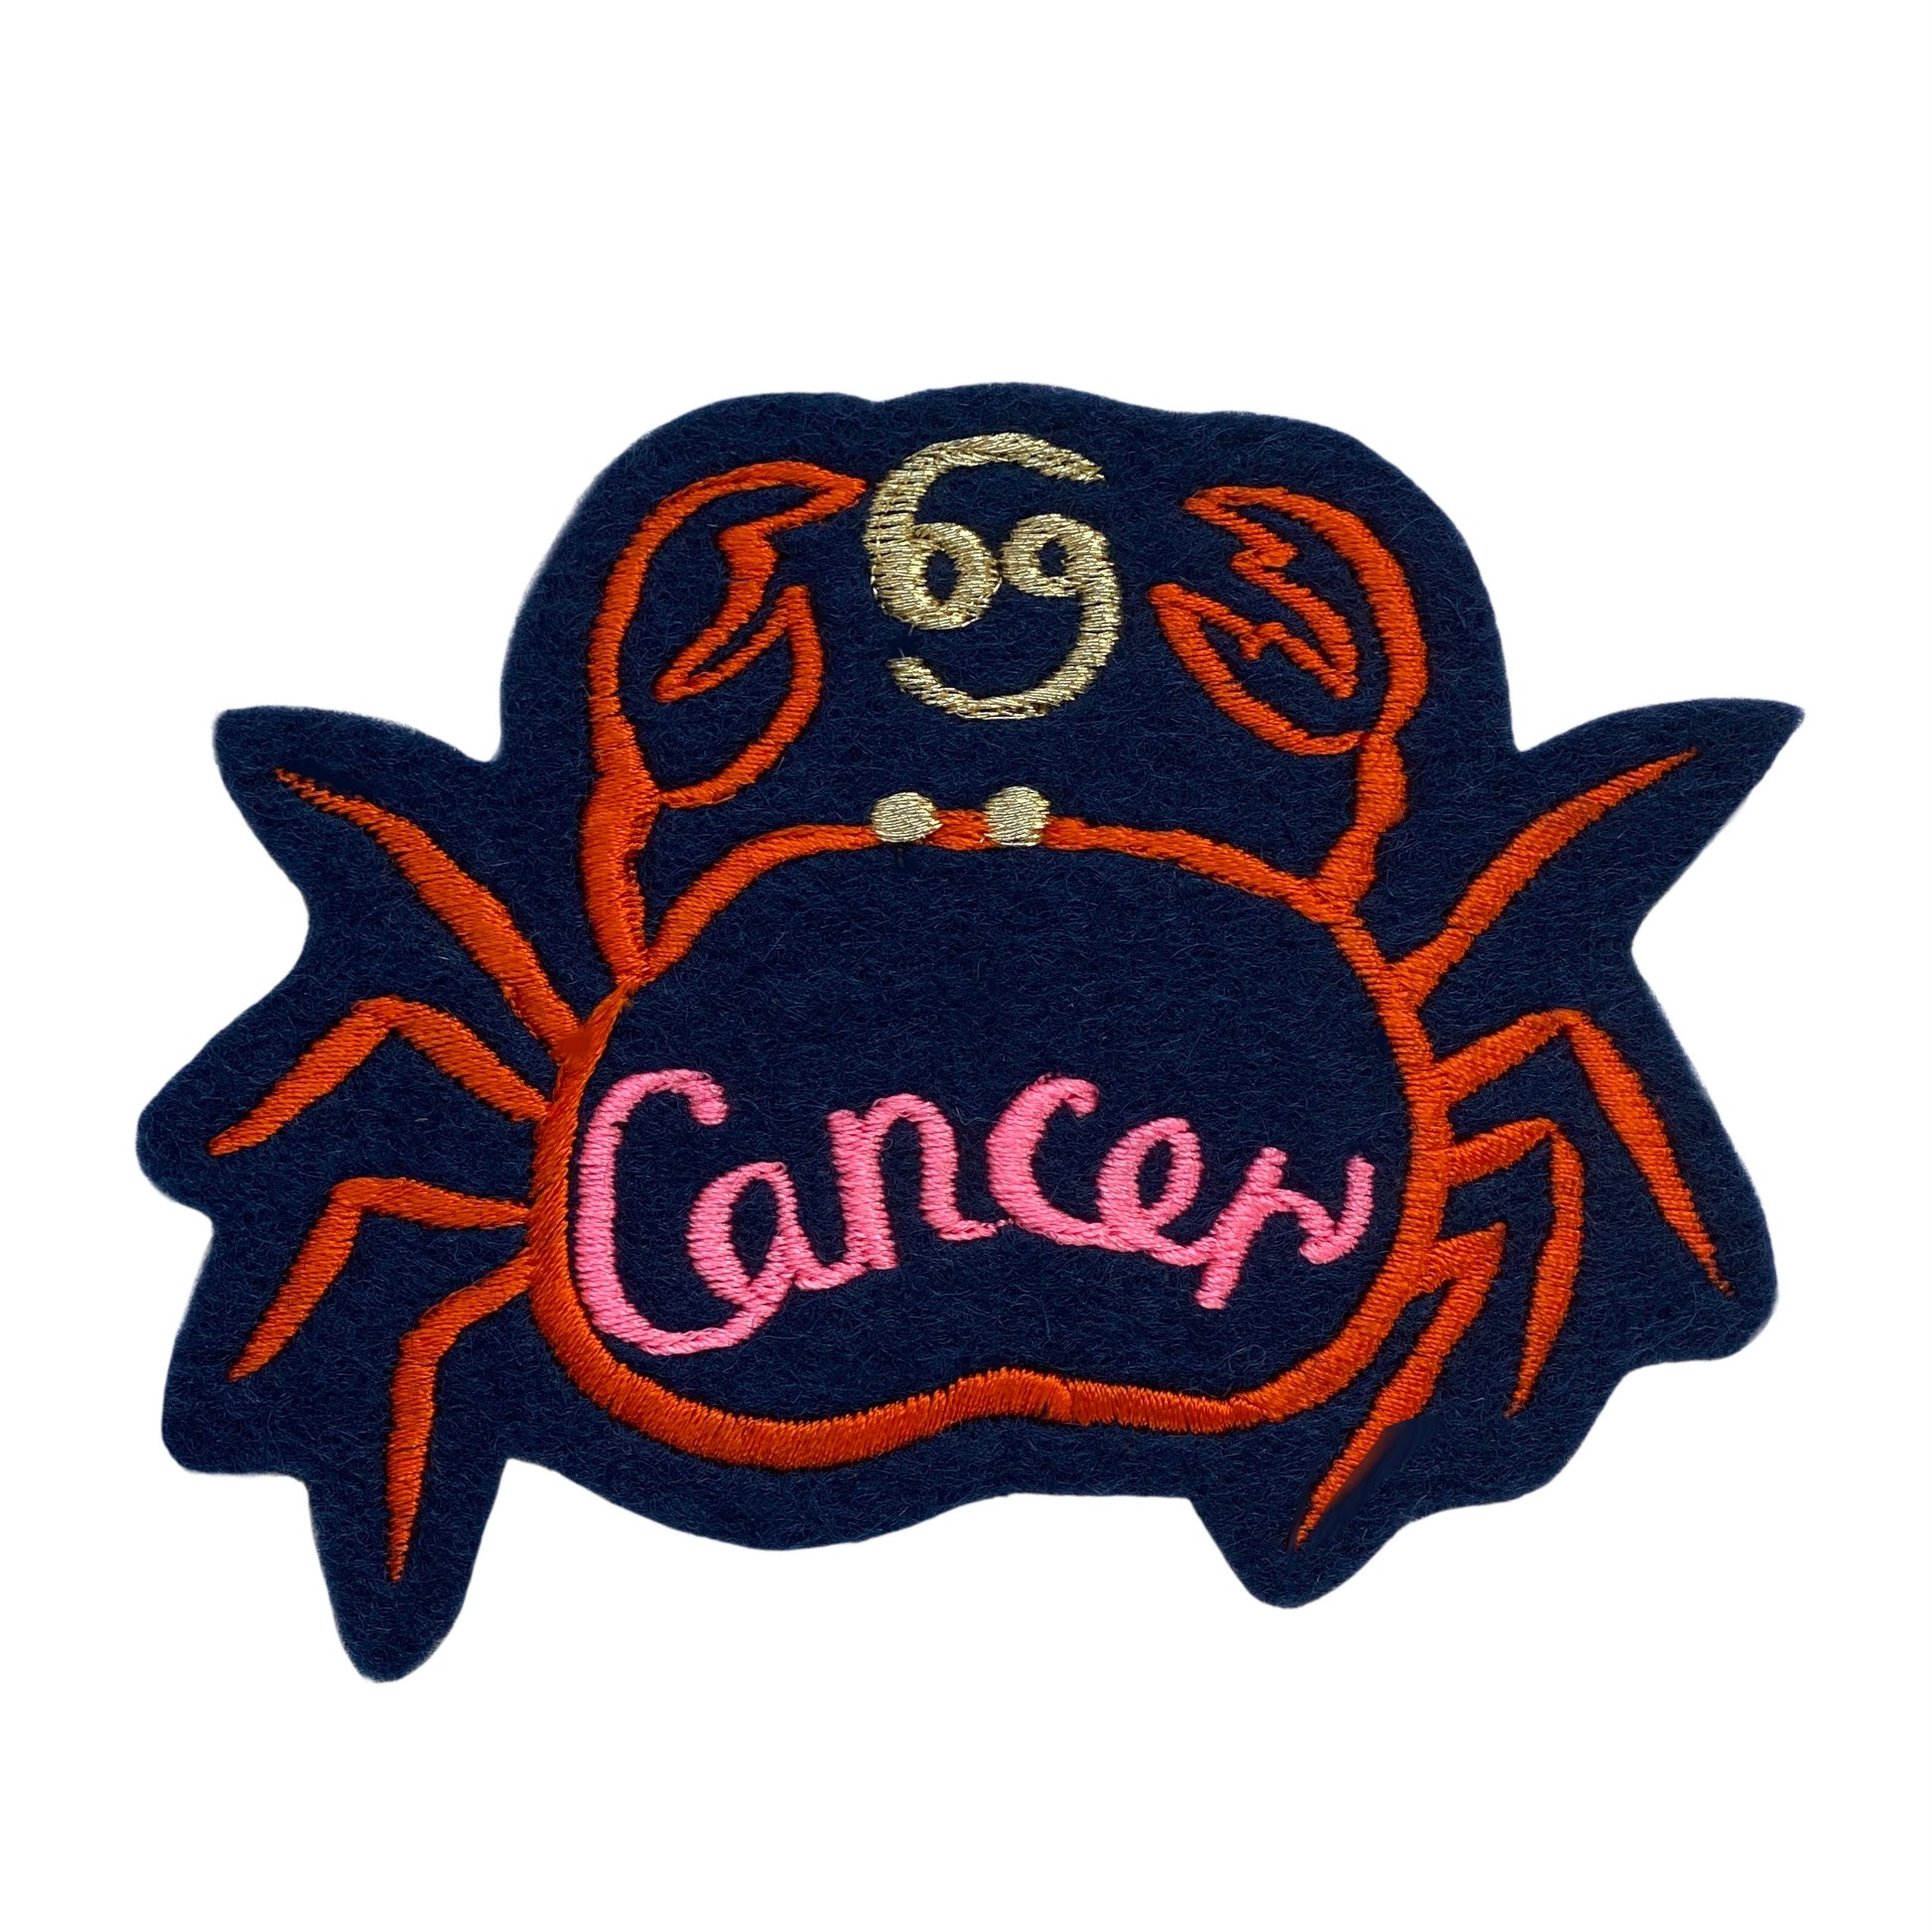 Cancer embroidered patch white background